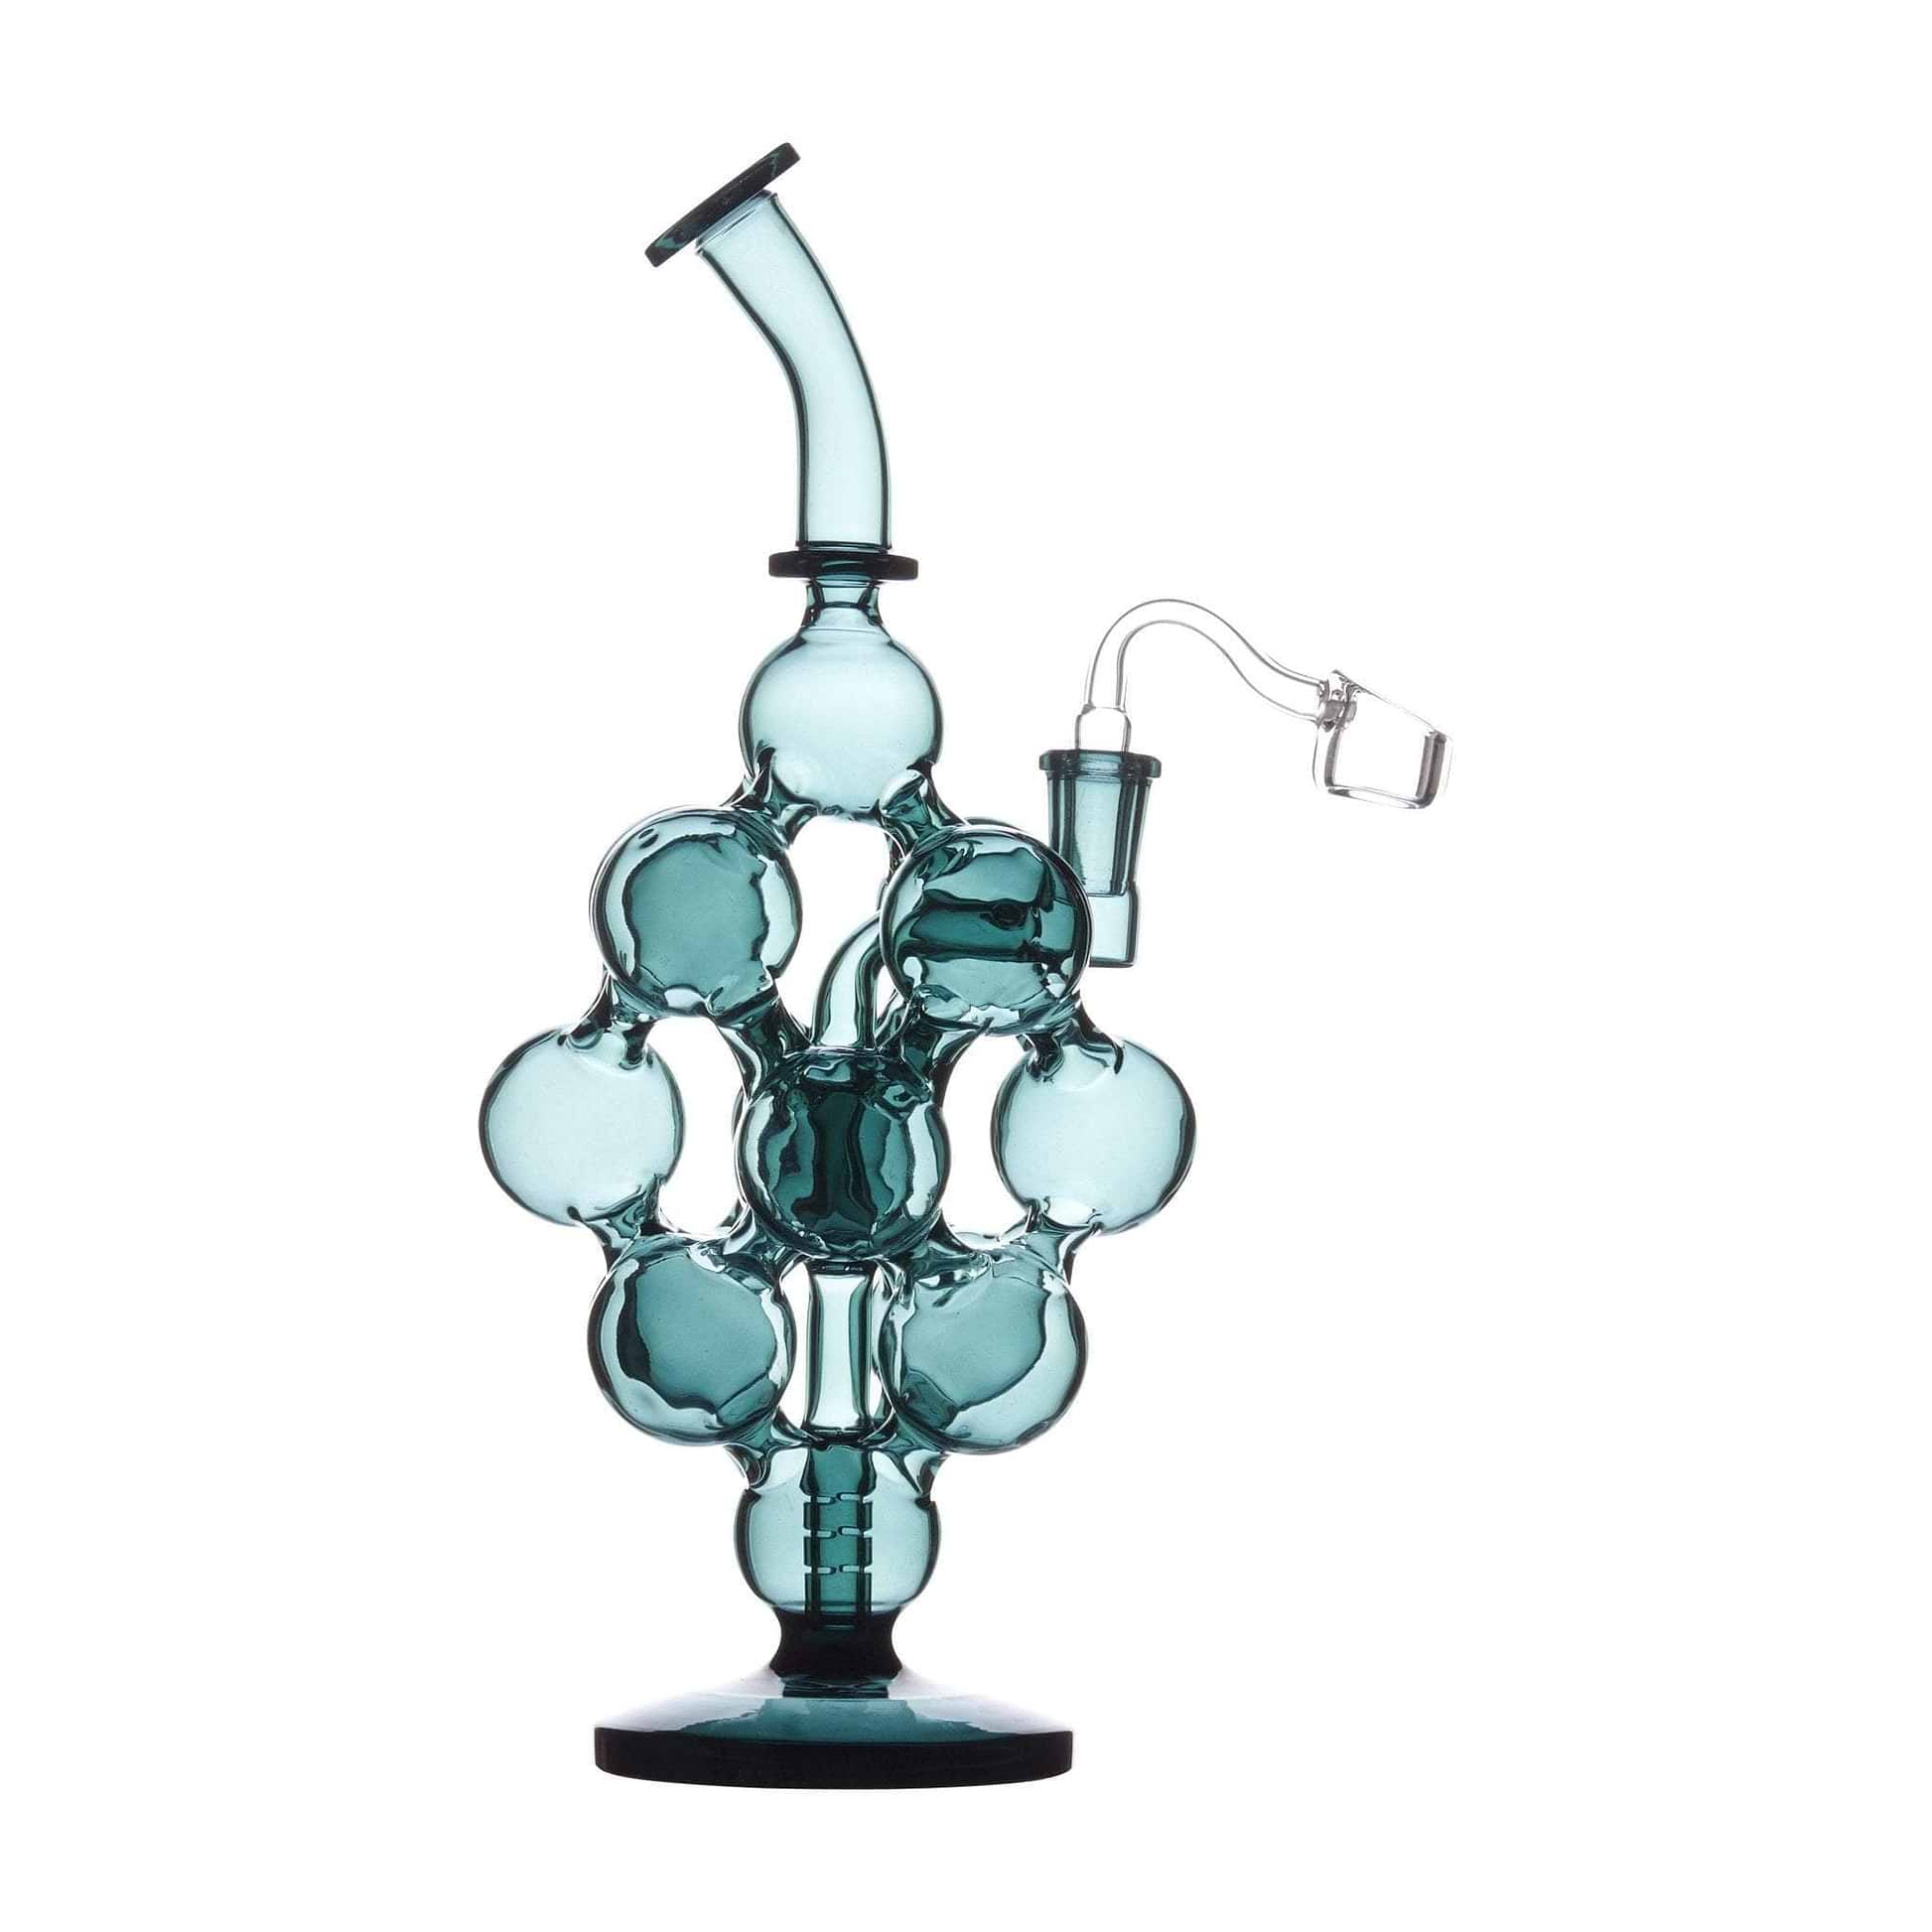 11-inch glass 15-chambered recycler dab rig smoking device intricate atom Science design